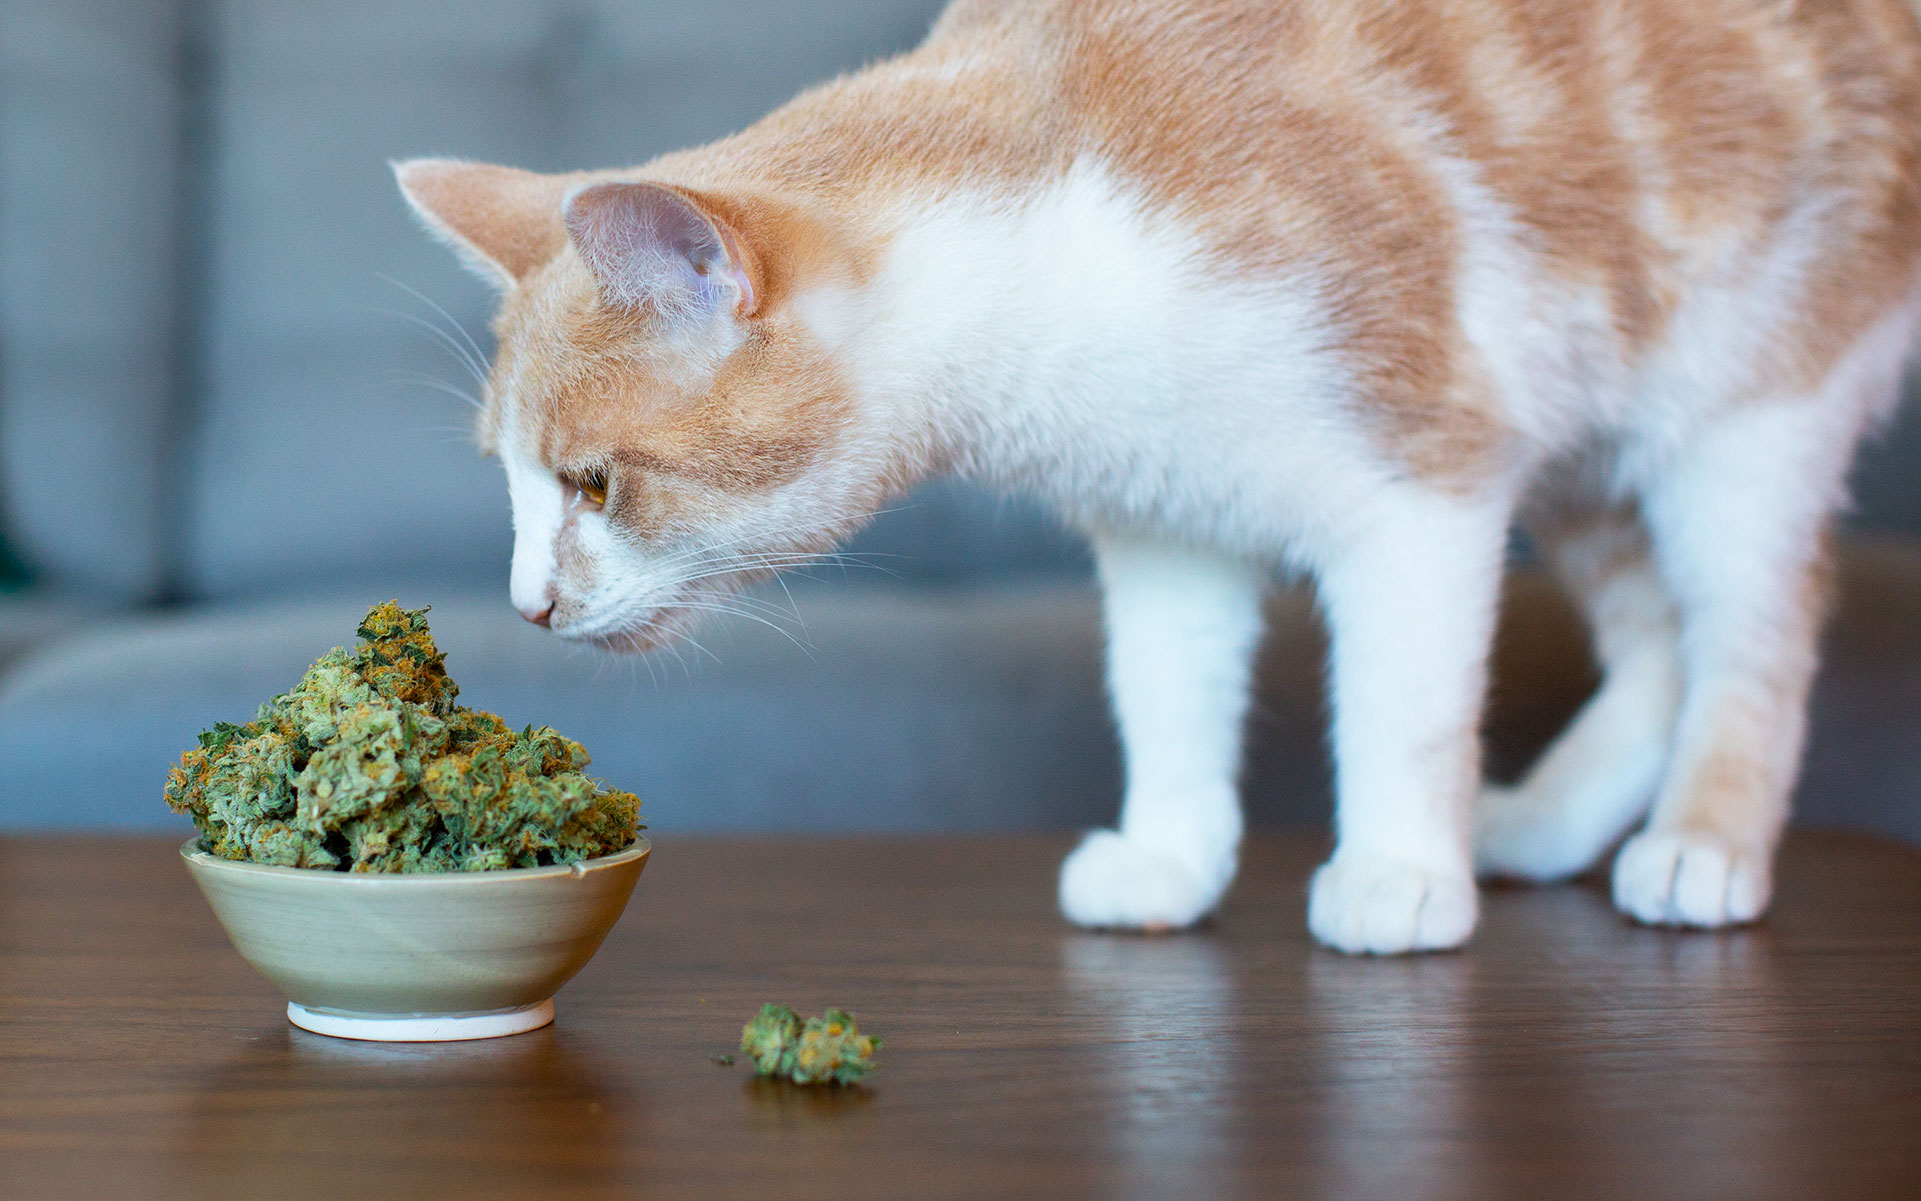 THINGS YOU MUST KNOW BEFORE GIVING CBD PRODUCTS TO YOUR PETS